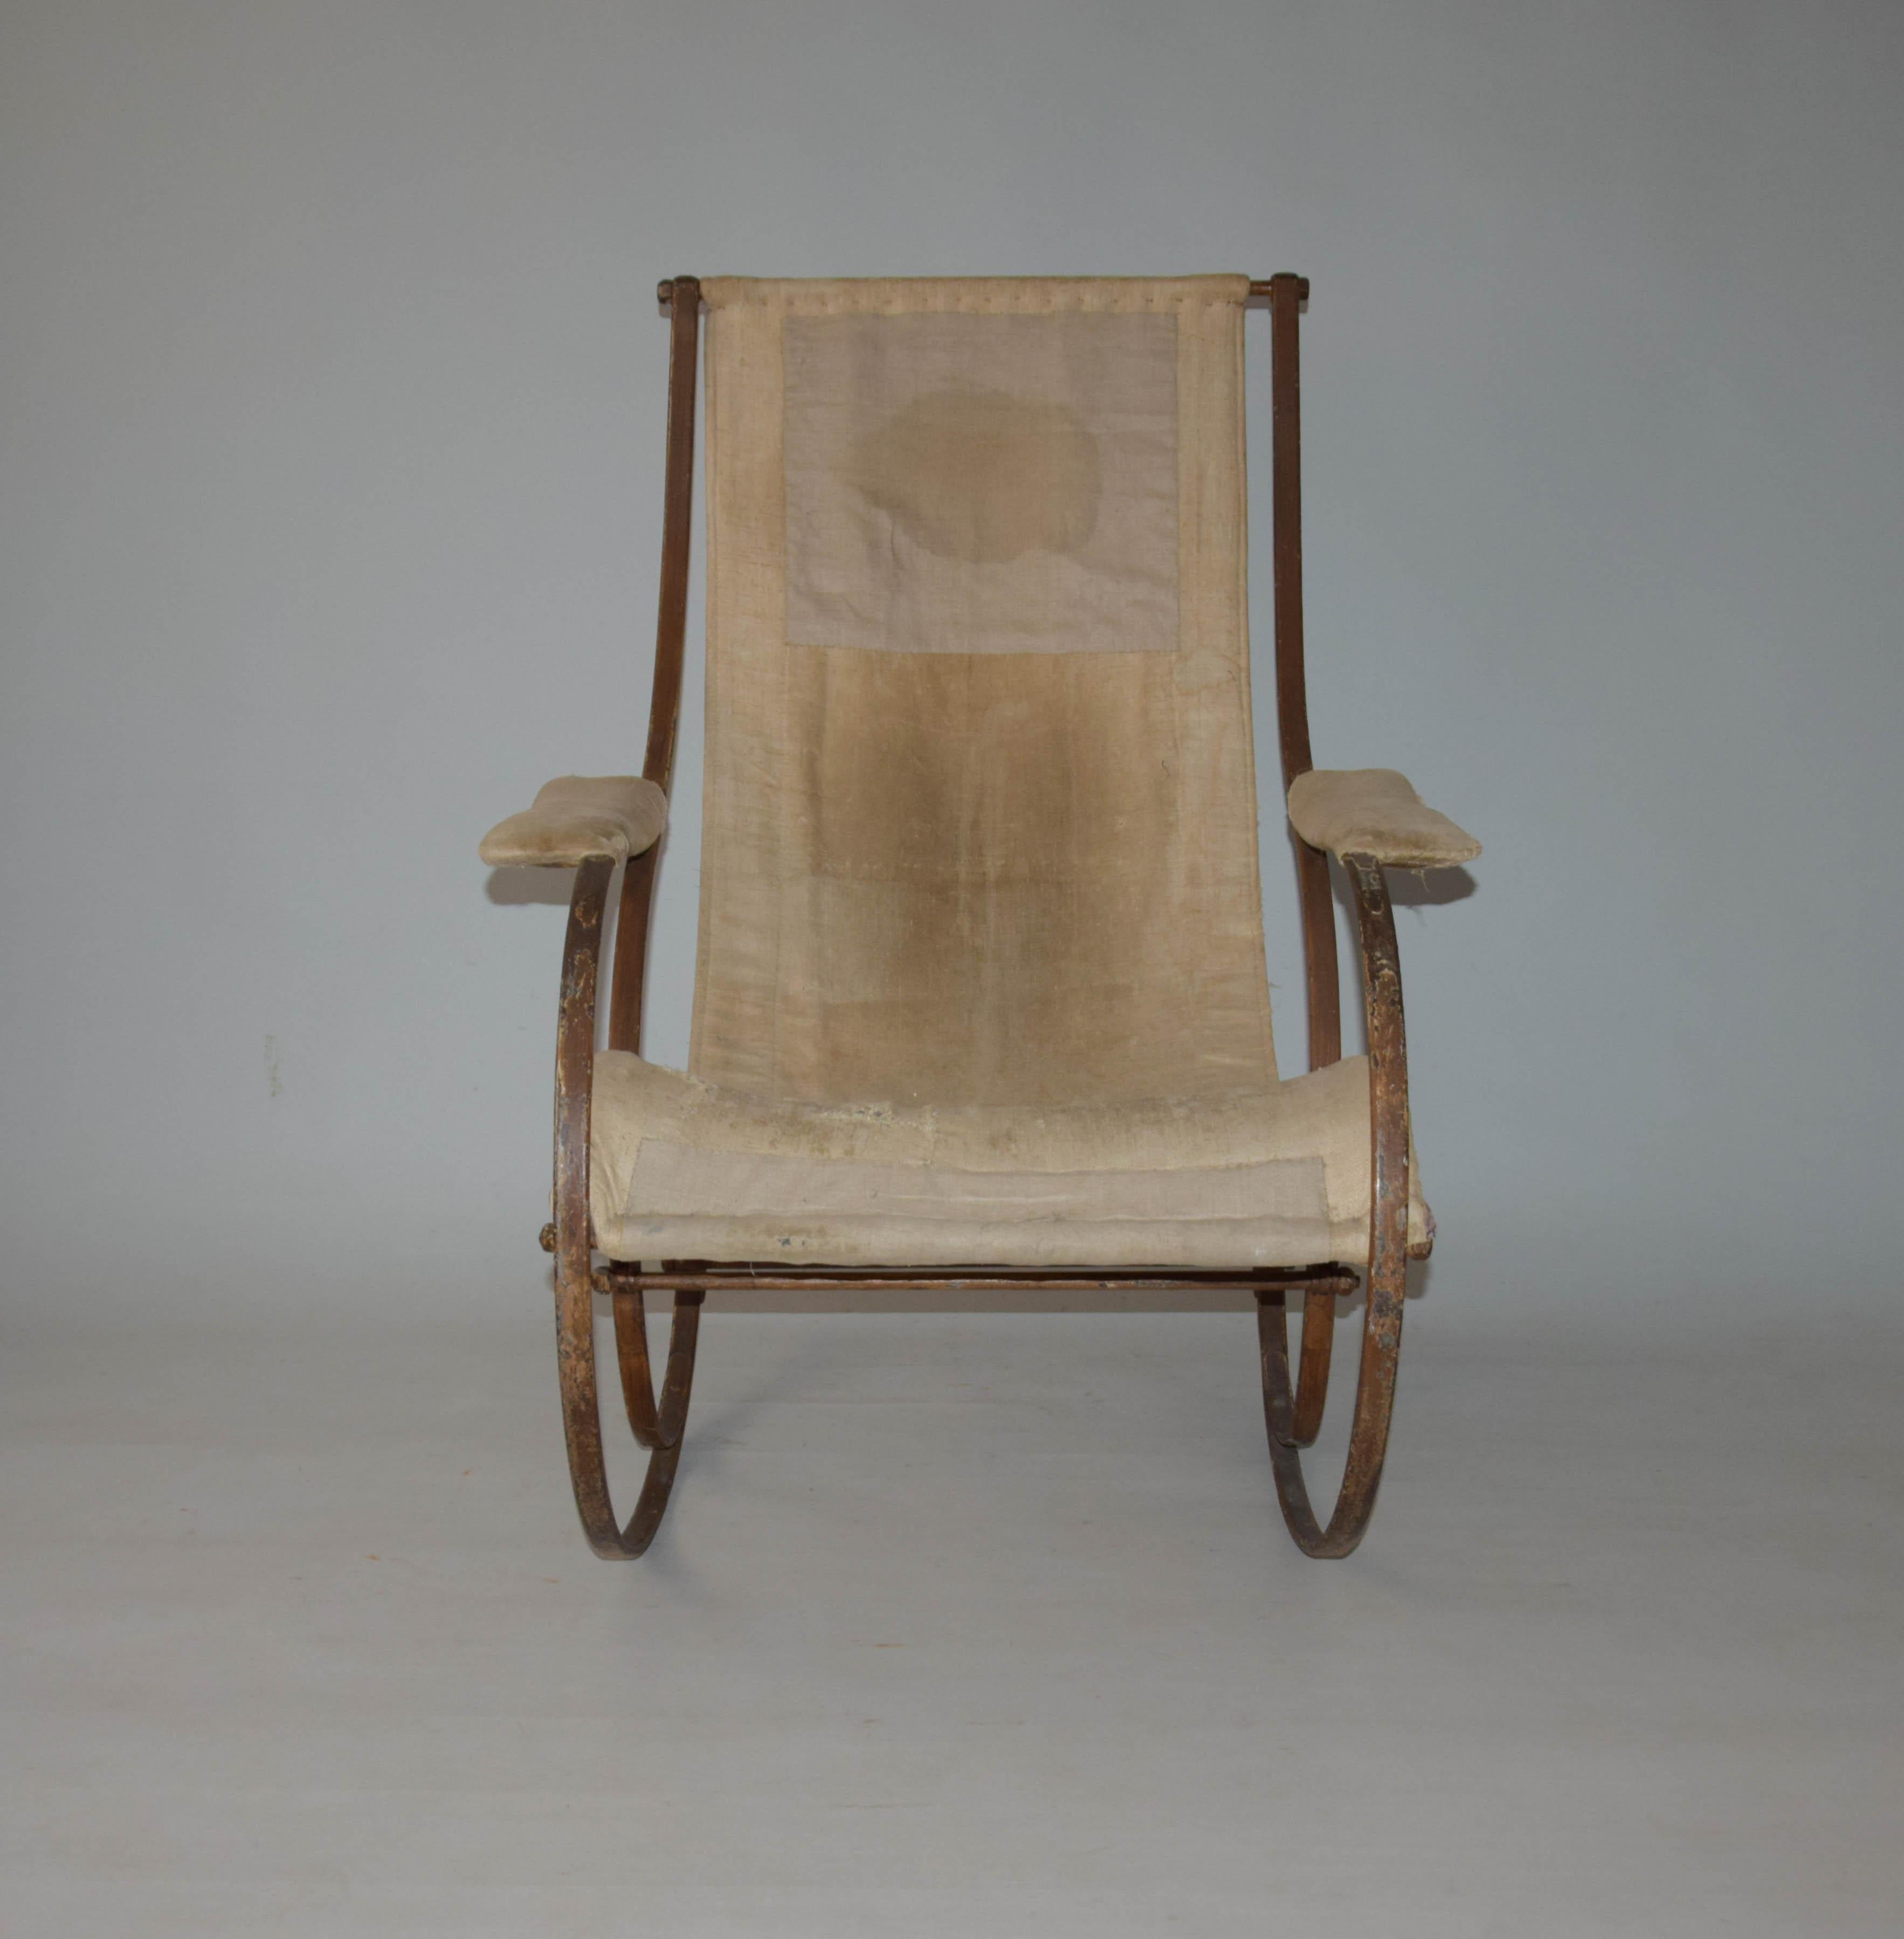 Steel Extremely Rare Rocking Chair by Peter Cooper, 1850s For Sale